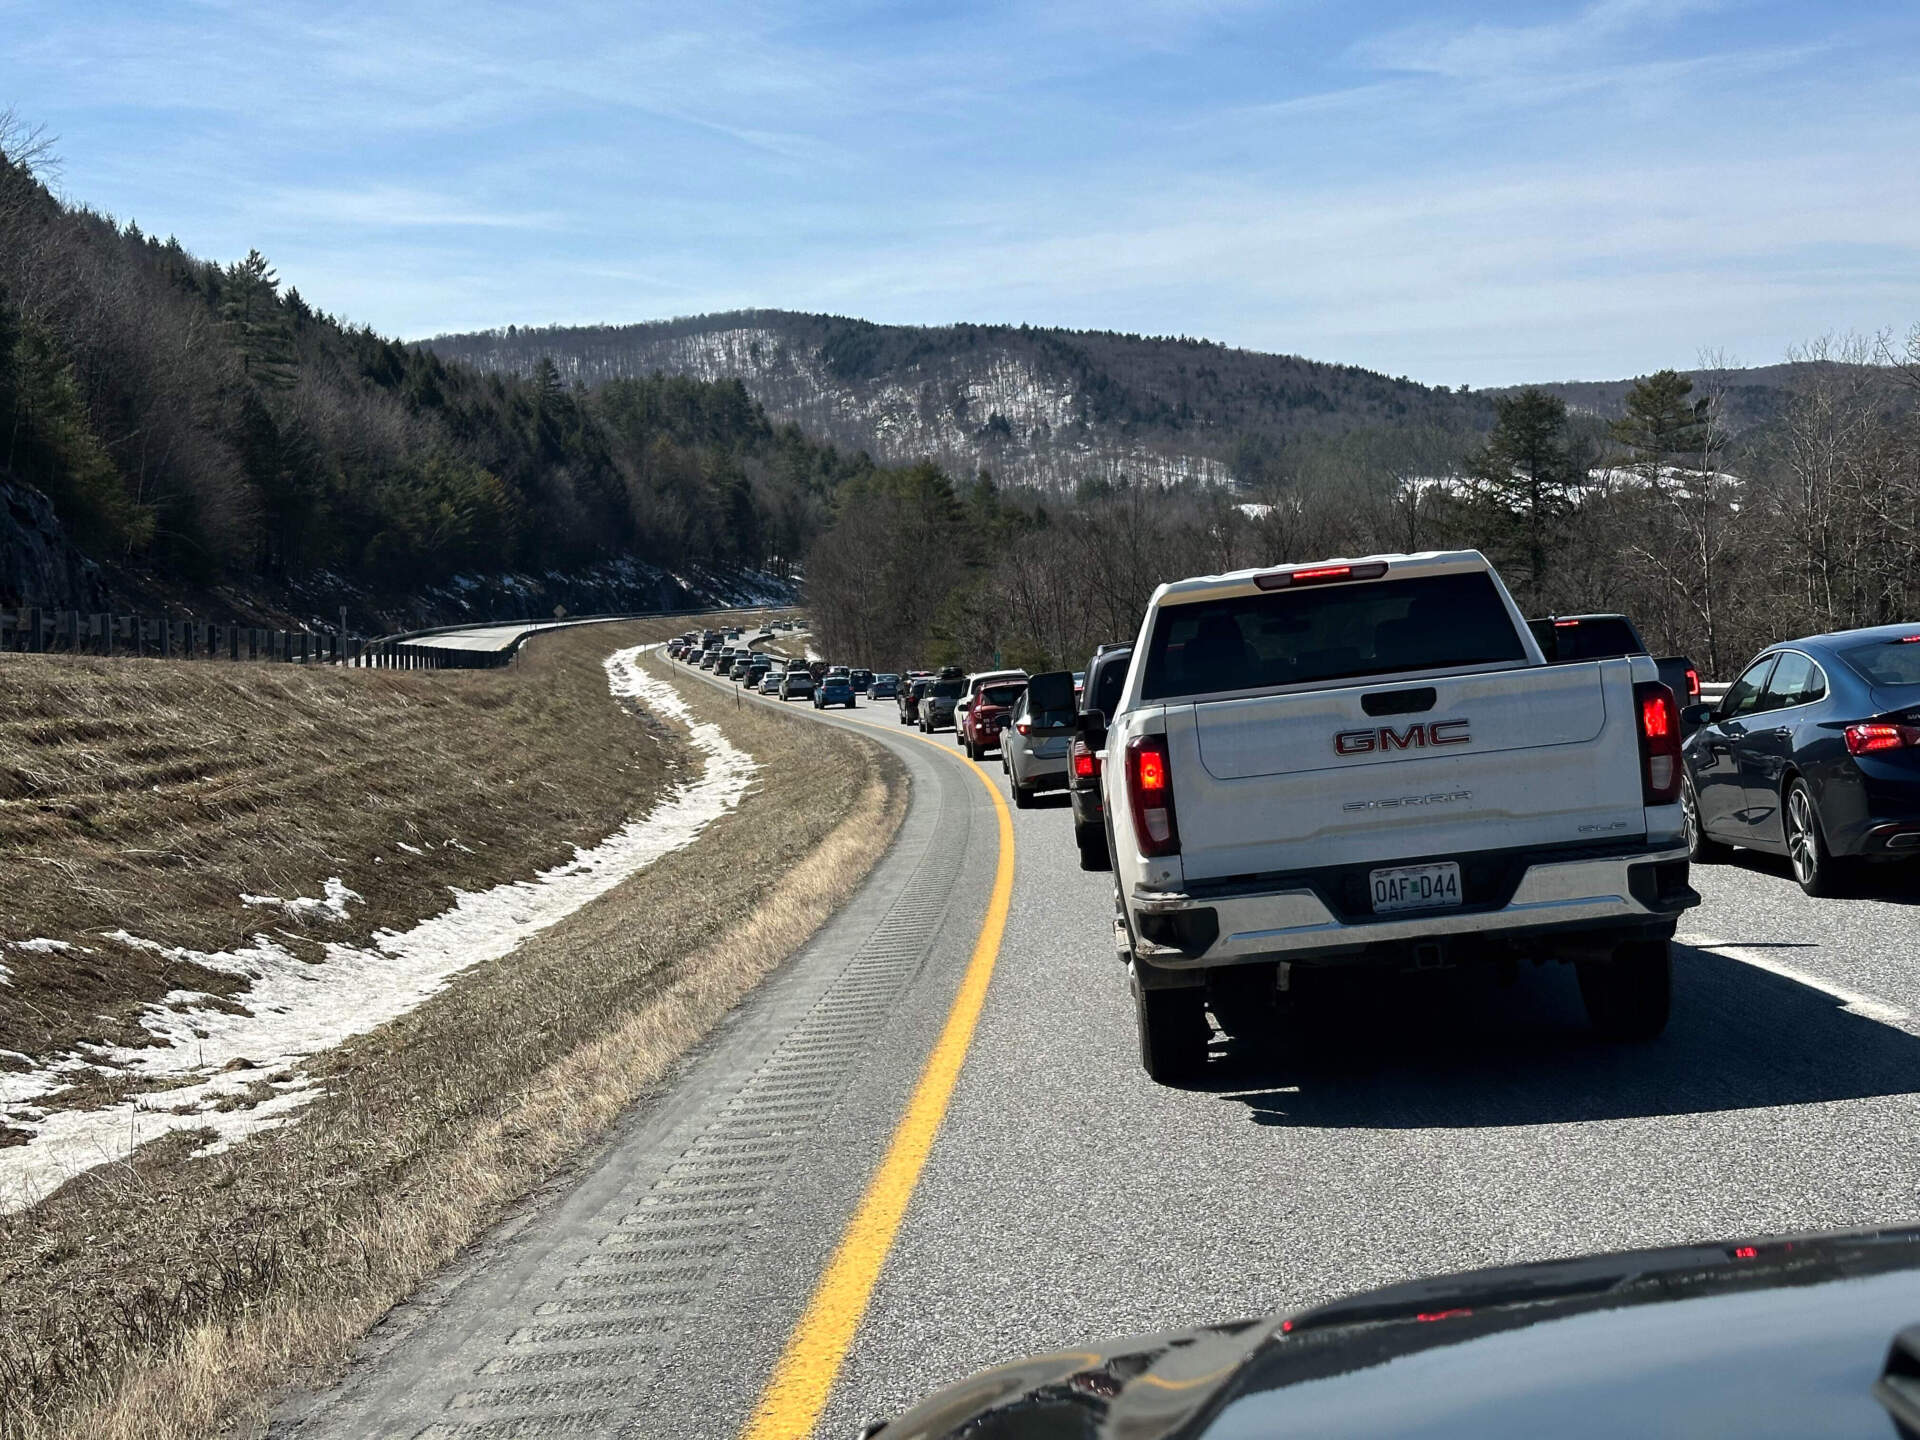 Traffic backs up on Interstate 89 in South Royalton, Vermont as spectators travel to see the total solar eclipse on April 8, 2024 (Jesse Costa/WBUR)